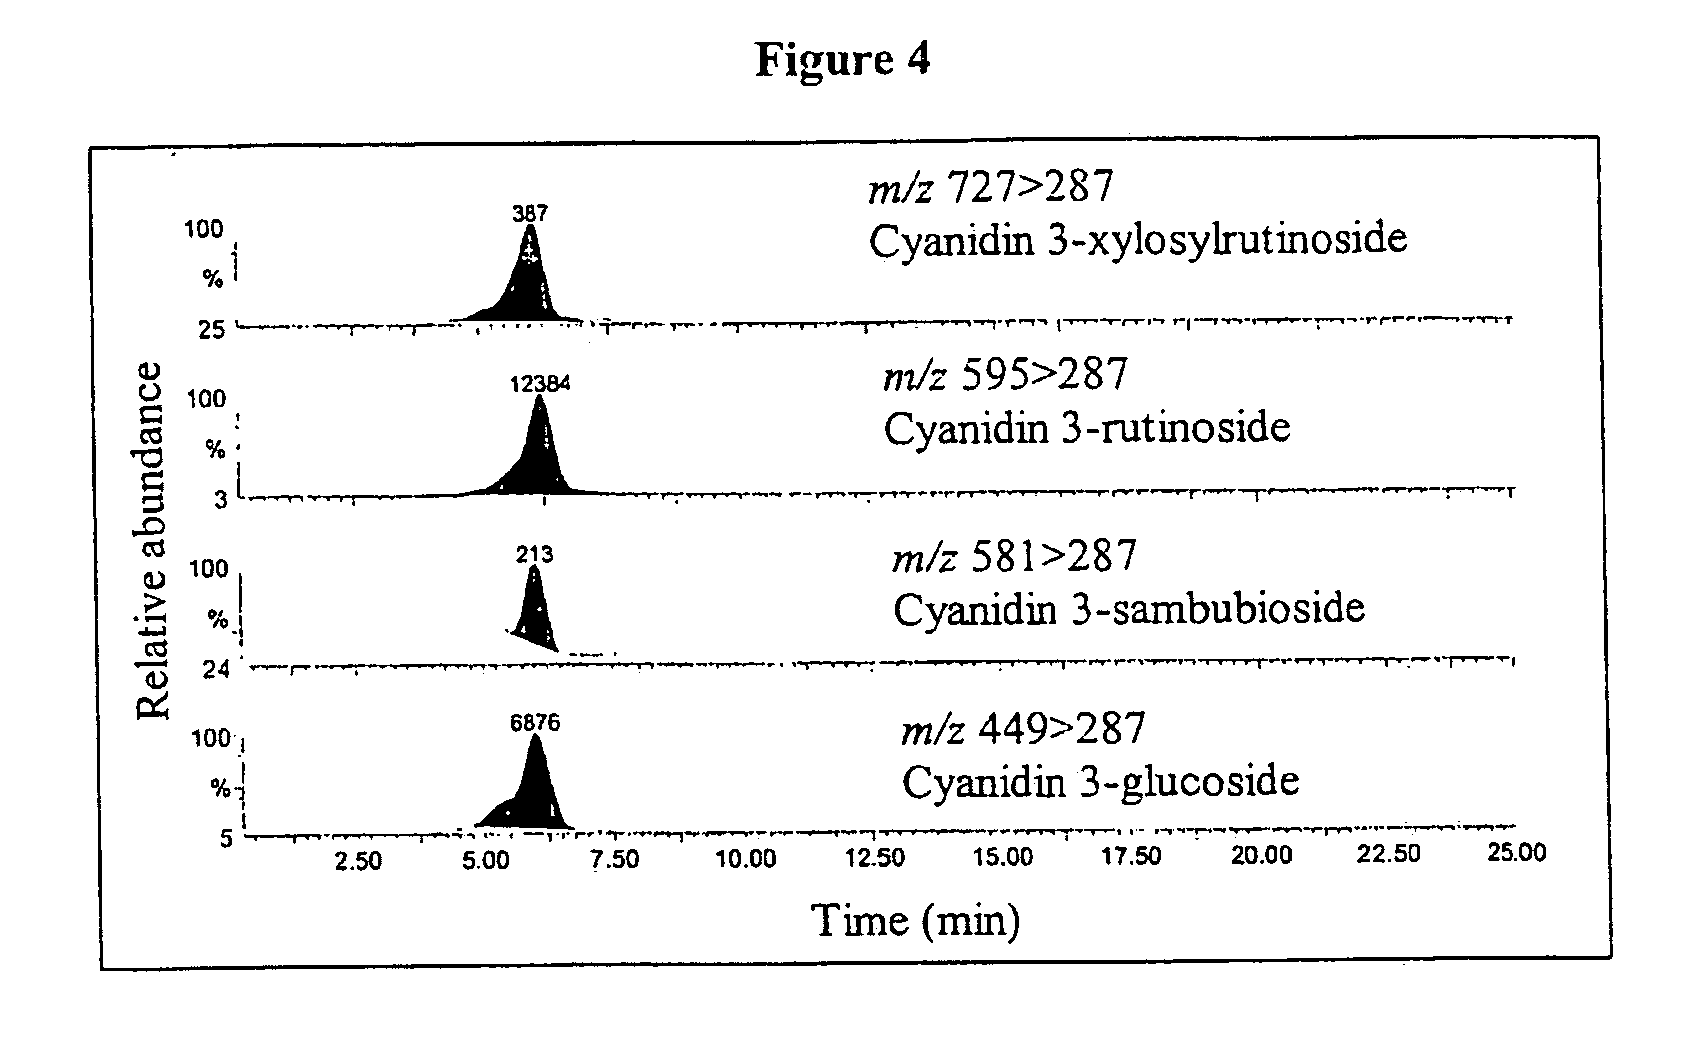 Compositions and methods for oral cancer chemoprevention using berry preparations and extracts